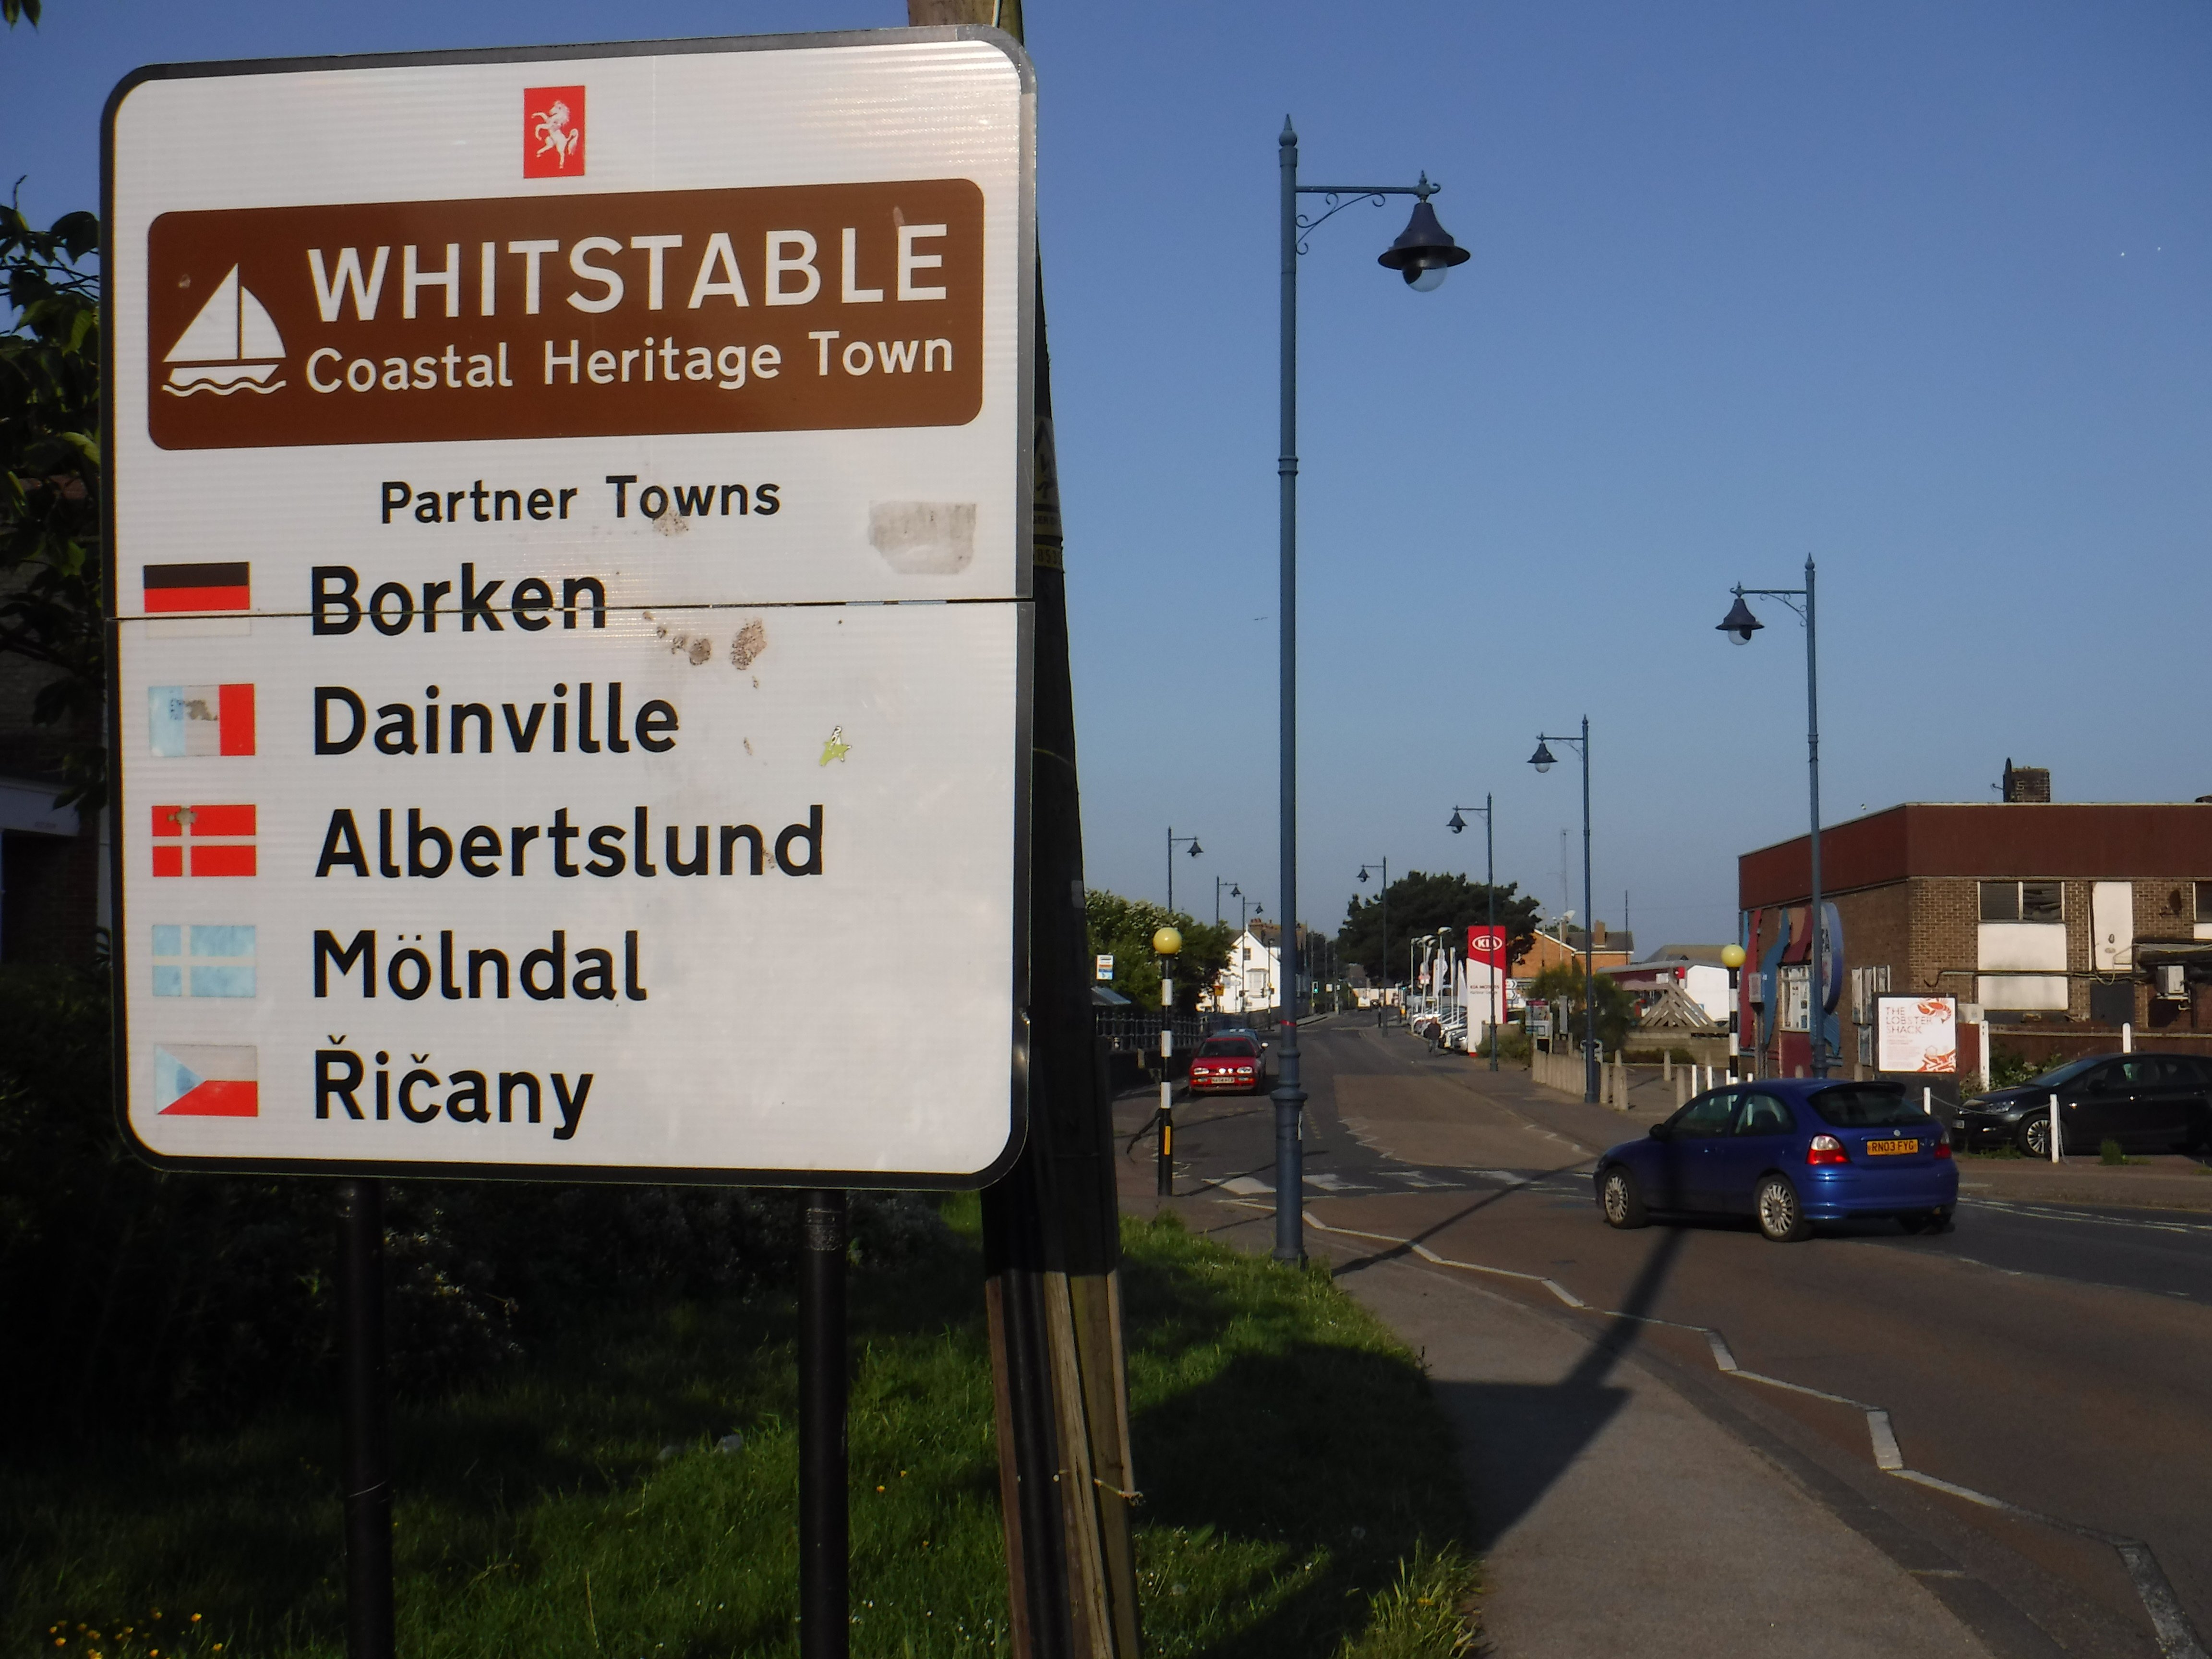 Visit Whitstable